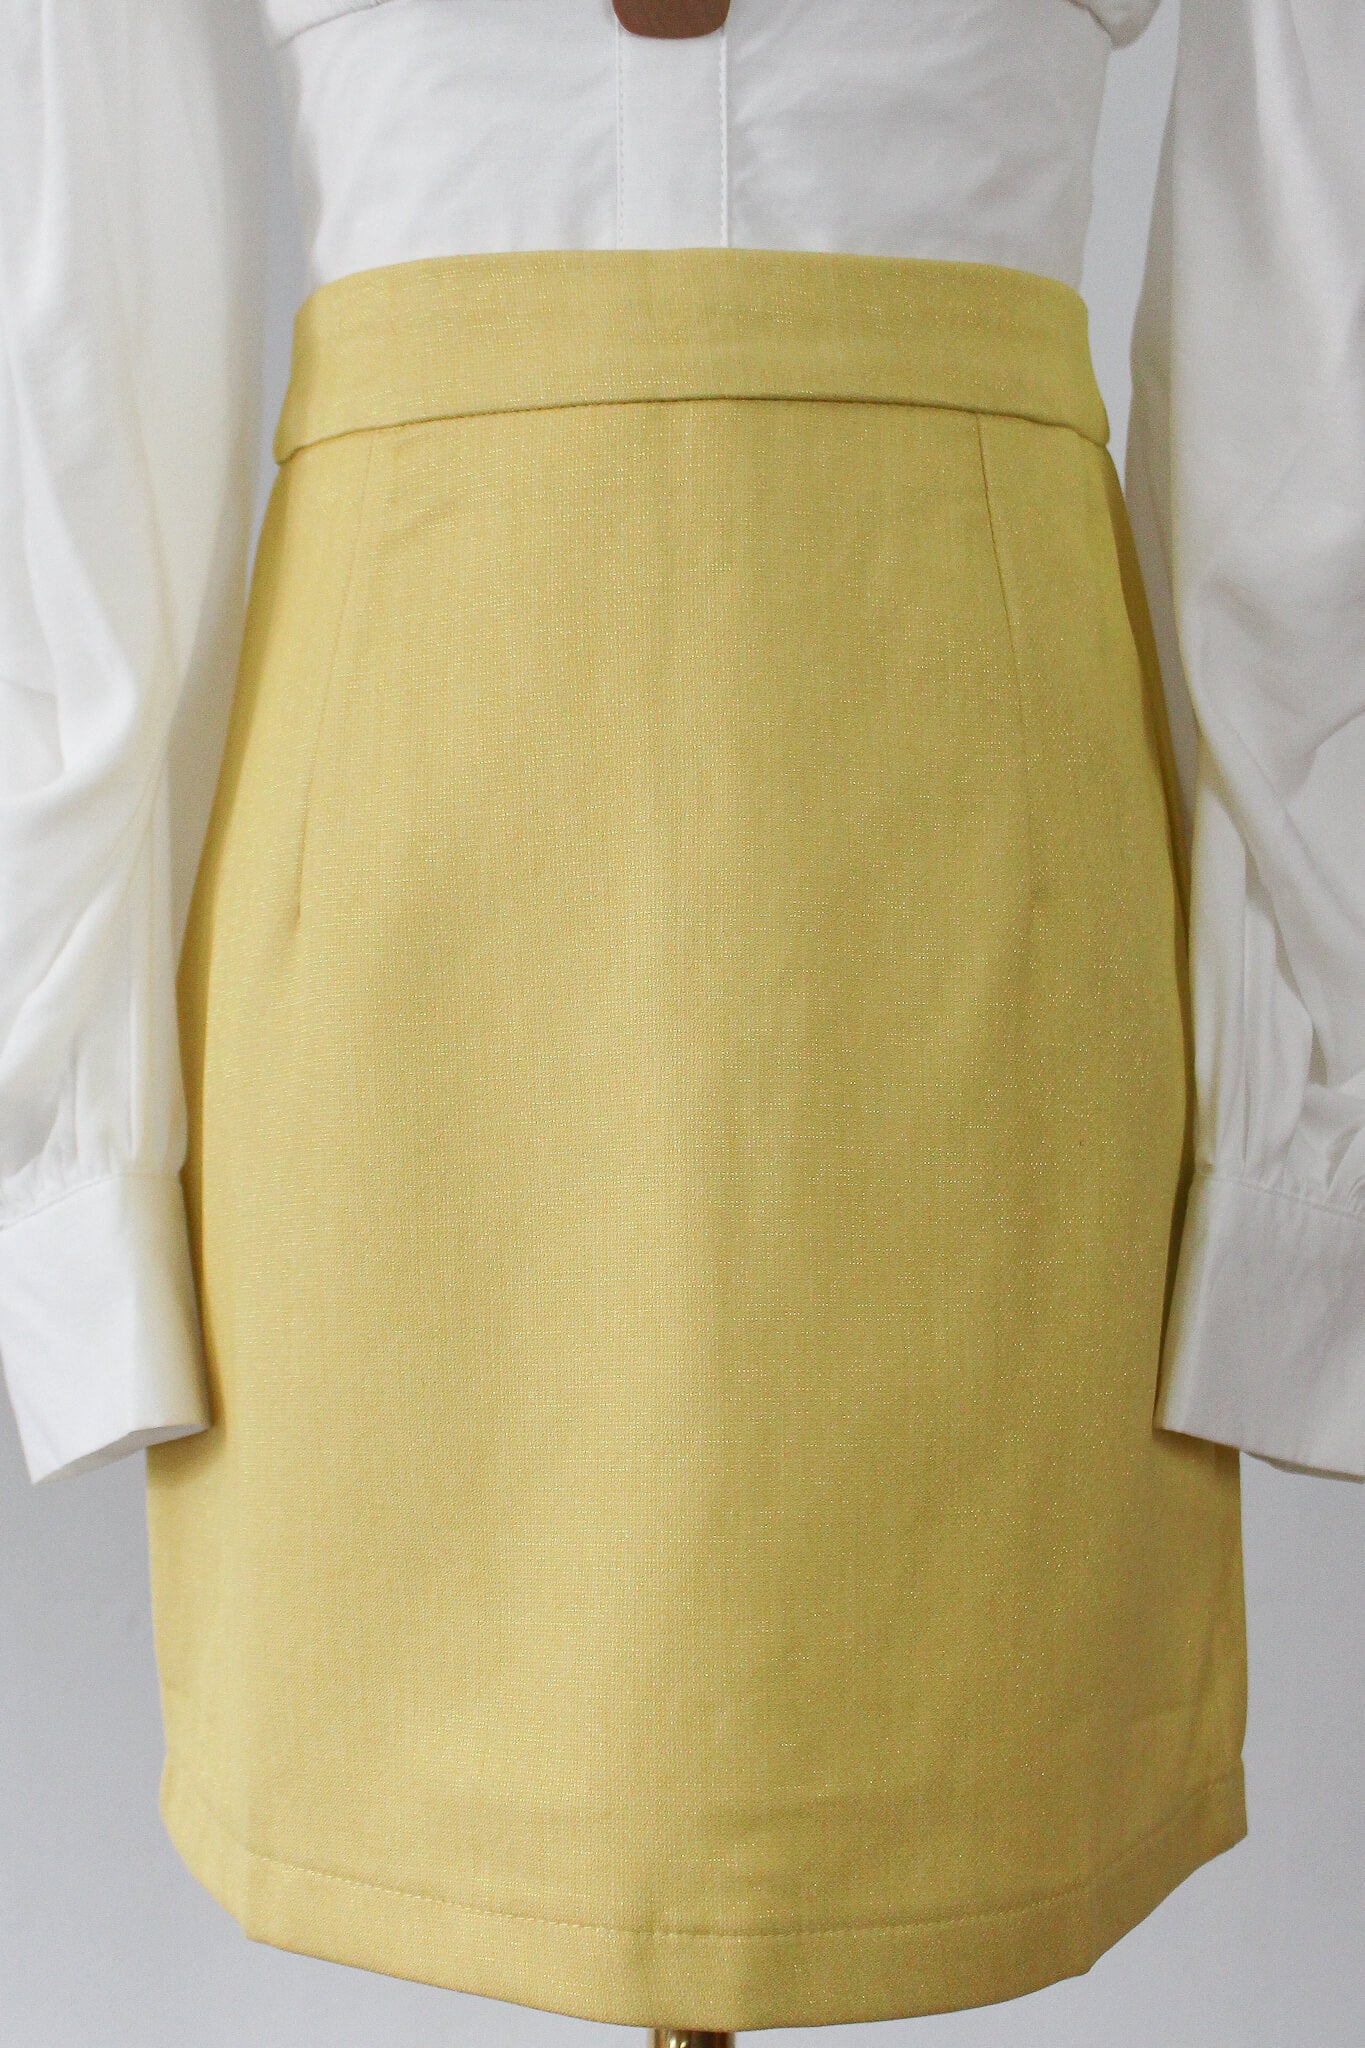 Fitted lined skirt, perfect for workwear